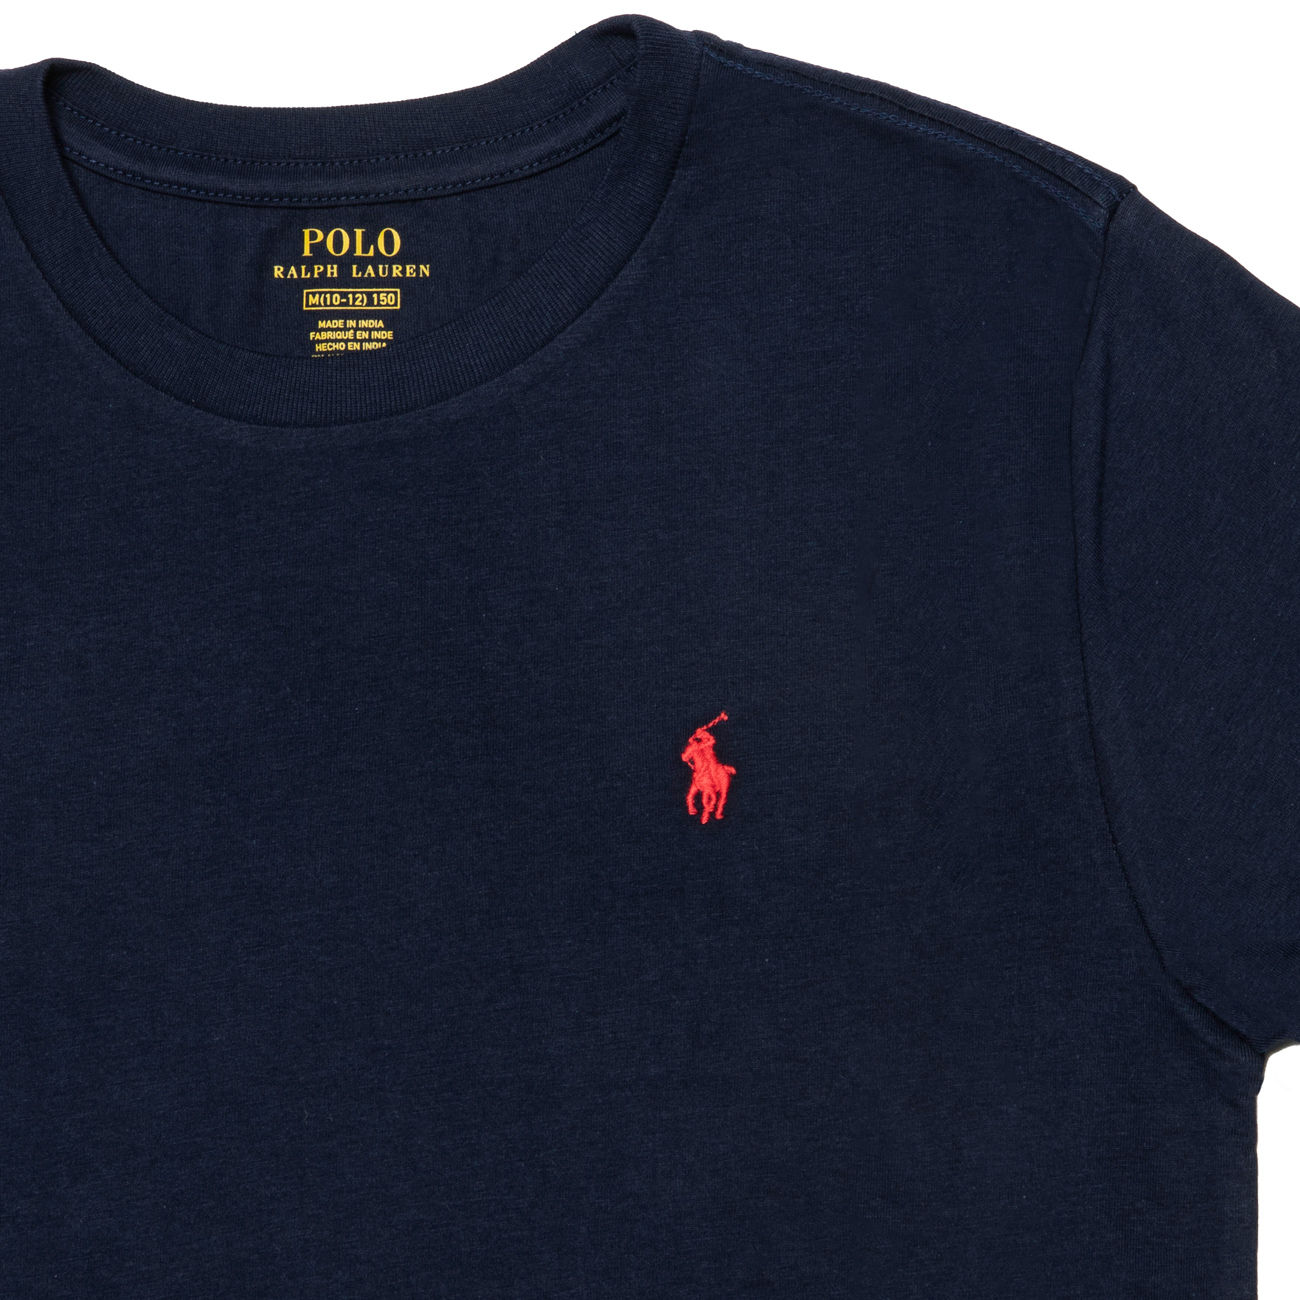 POLO RALPH LAUREN BOY T-SHIRT WITH LOGO EMBROIDERED Kid Navy 